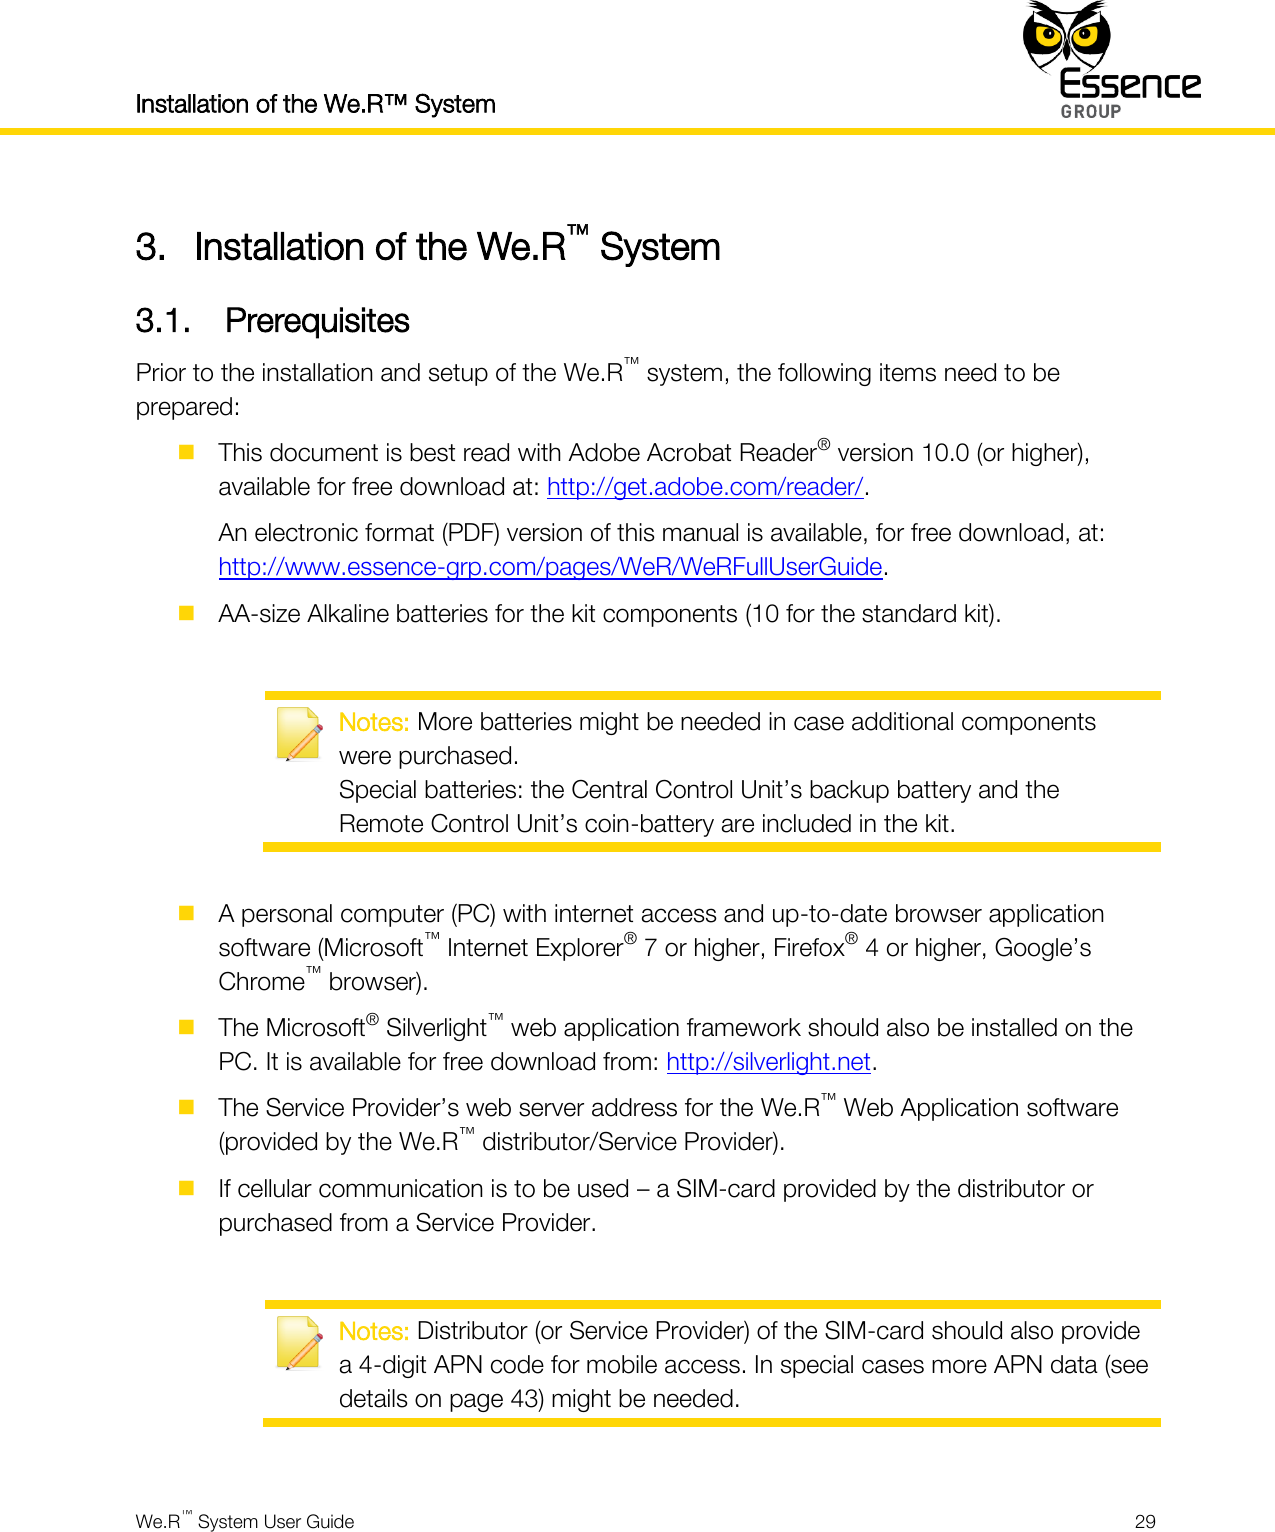 Installation of the We.R™ System    We.R™ System User Guide  29  3. Installation of the We.R™ System 3.1. Prerequisites Prior to the installation and setup of the We.R™ system, the following items need to be prepared:  This document is best read with Adobe Acrobat Reader® version 10.0 (or higher), available for free download at: http://get.adobe.com/reader/. An electronic format (PDF) version of this manual is available, for free download, at: http://www.essence-grp.com/pages/WeR/WeRFullUserGuide.  AA-size Alkaline batteries for the kit components (10 for the standard kit).   Notes: More batteries might be needed in case additional components were purchased. Special batteries: the Central Control Unit’s backup battery and the Remote Control Unit’s coin-battery are included in the kit.   A personal computer (PC) with internet access and up-to-date browser application software (Microsoft™ Internet Explorer® 7 or higher, Firefox® 4 or higher, Google’s Chrome™ browser).  The Microsoft® Silverlight™ web application framework should also be installed on the PC. It is available for free download from: http://silverlight.net.  The Service Provider’s web server address for the We.R™ Web Application software (provided by the We.R™ distributor/Service Provider).  If cellular communication is to be used – a SIM-card provided by the distributor or purchased from a Service Provider.   Notes: Distributor (or Service Provider) of the SIM-card should also provide a 4-digit APN code for mobile access. In special cases more APN data (see details on page 43) might be needed.  